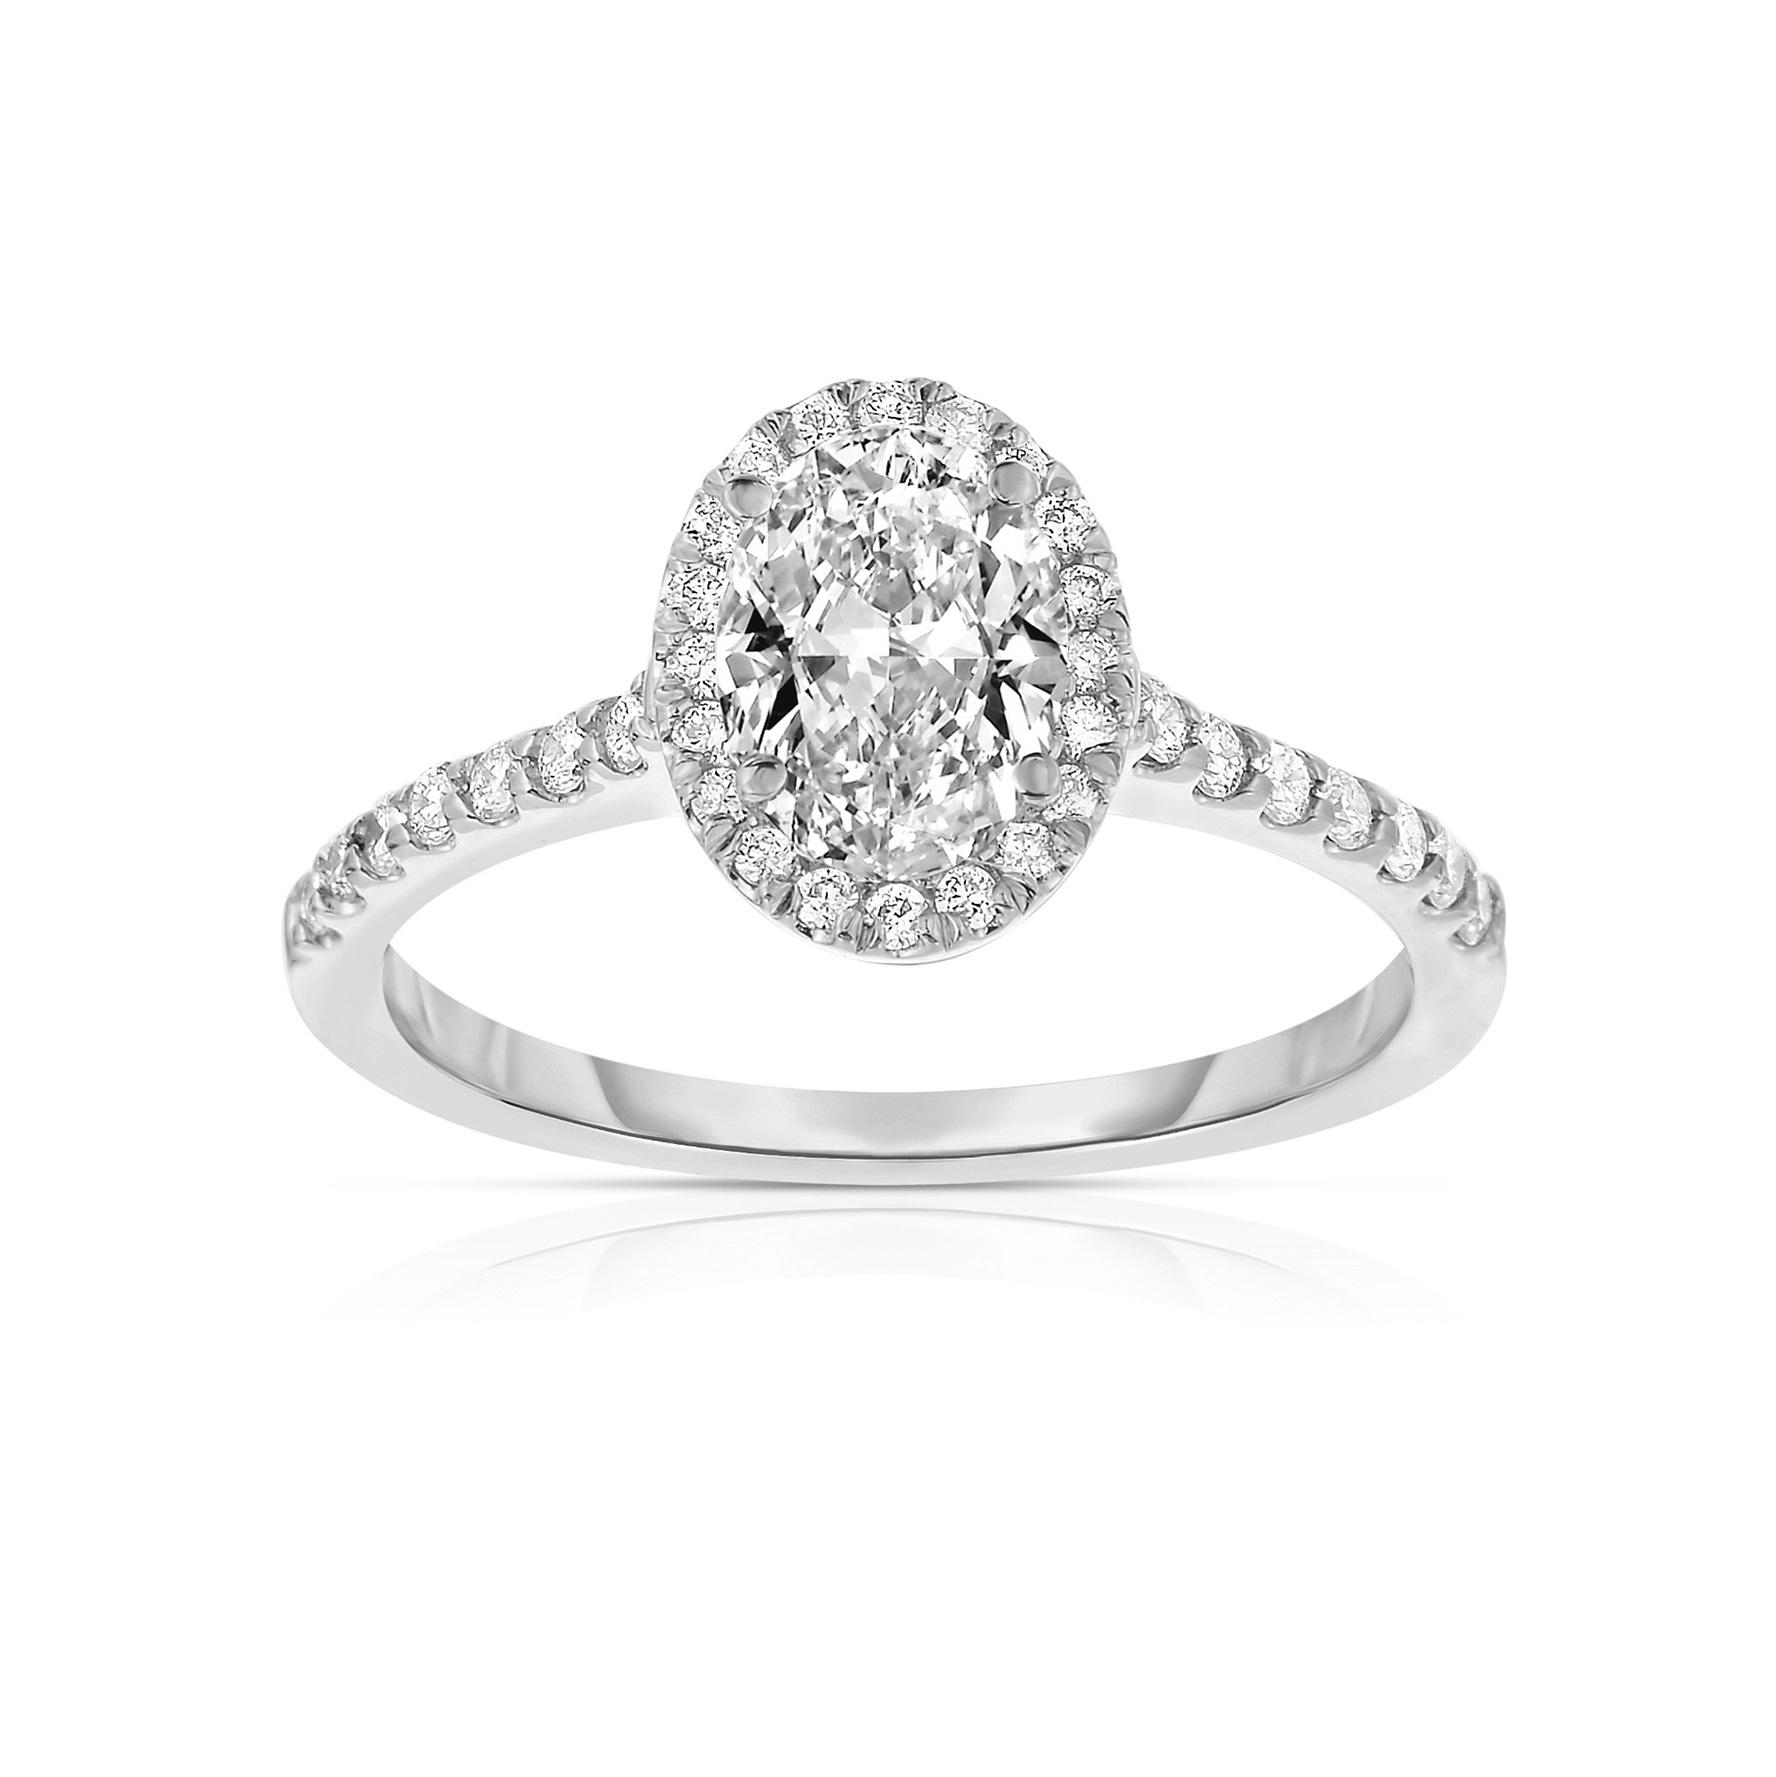 White Gold 1.00 CTW Oval Diamond Halo Engagement Ring